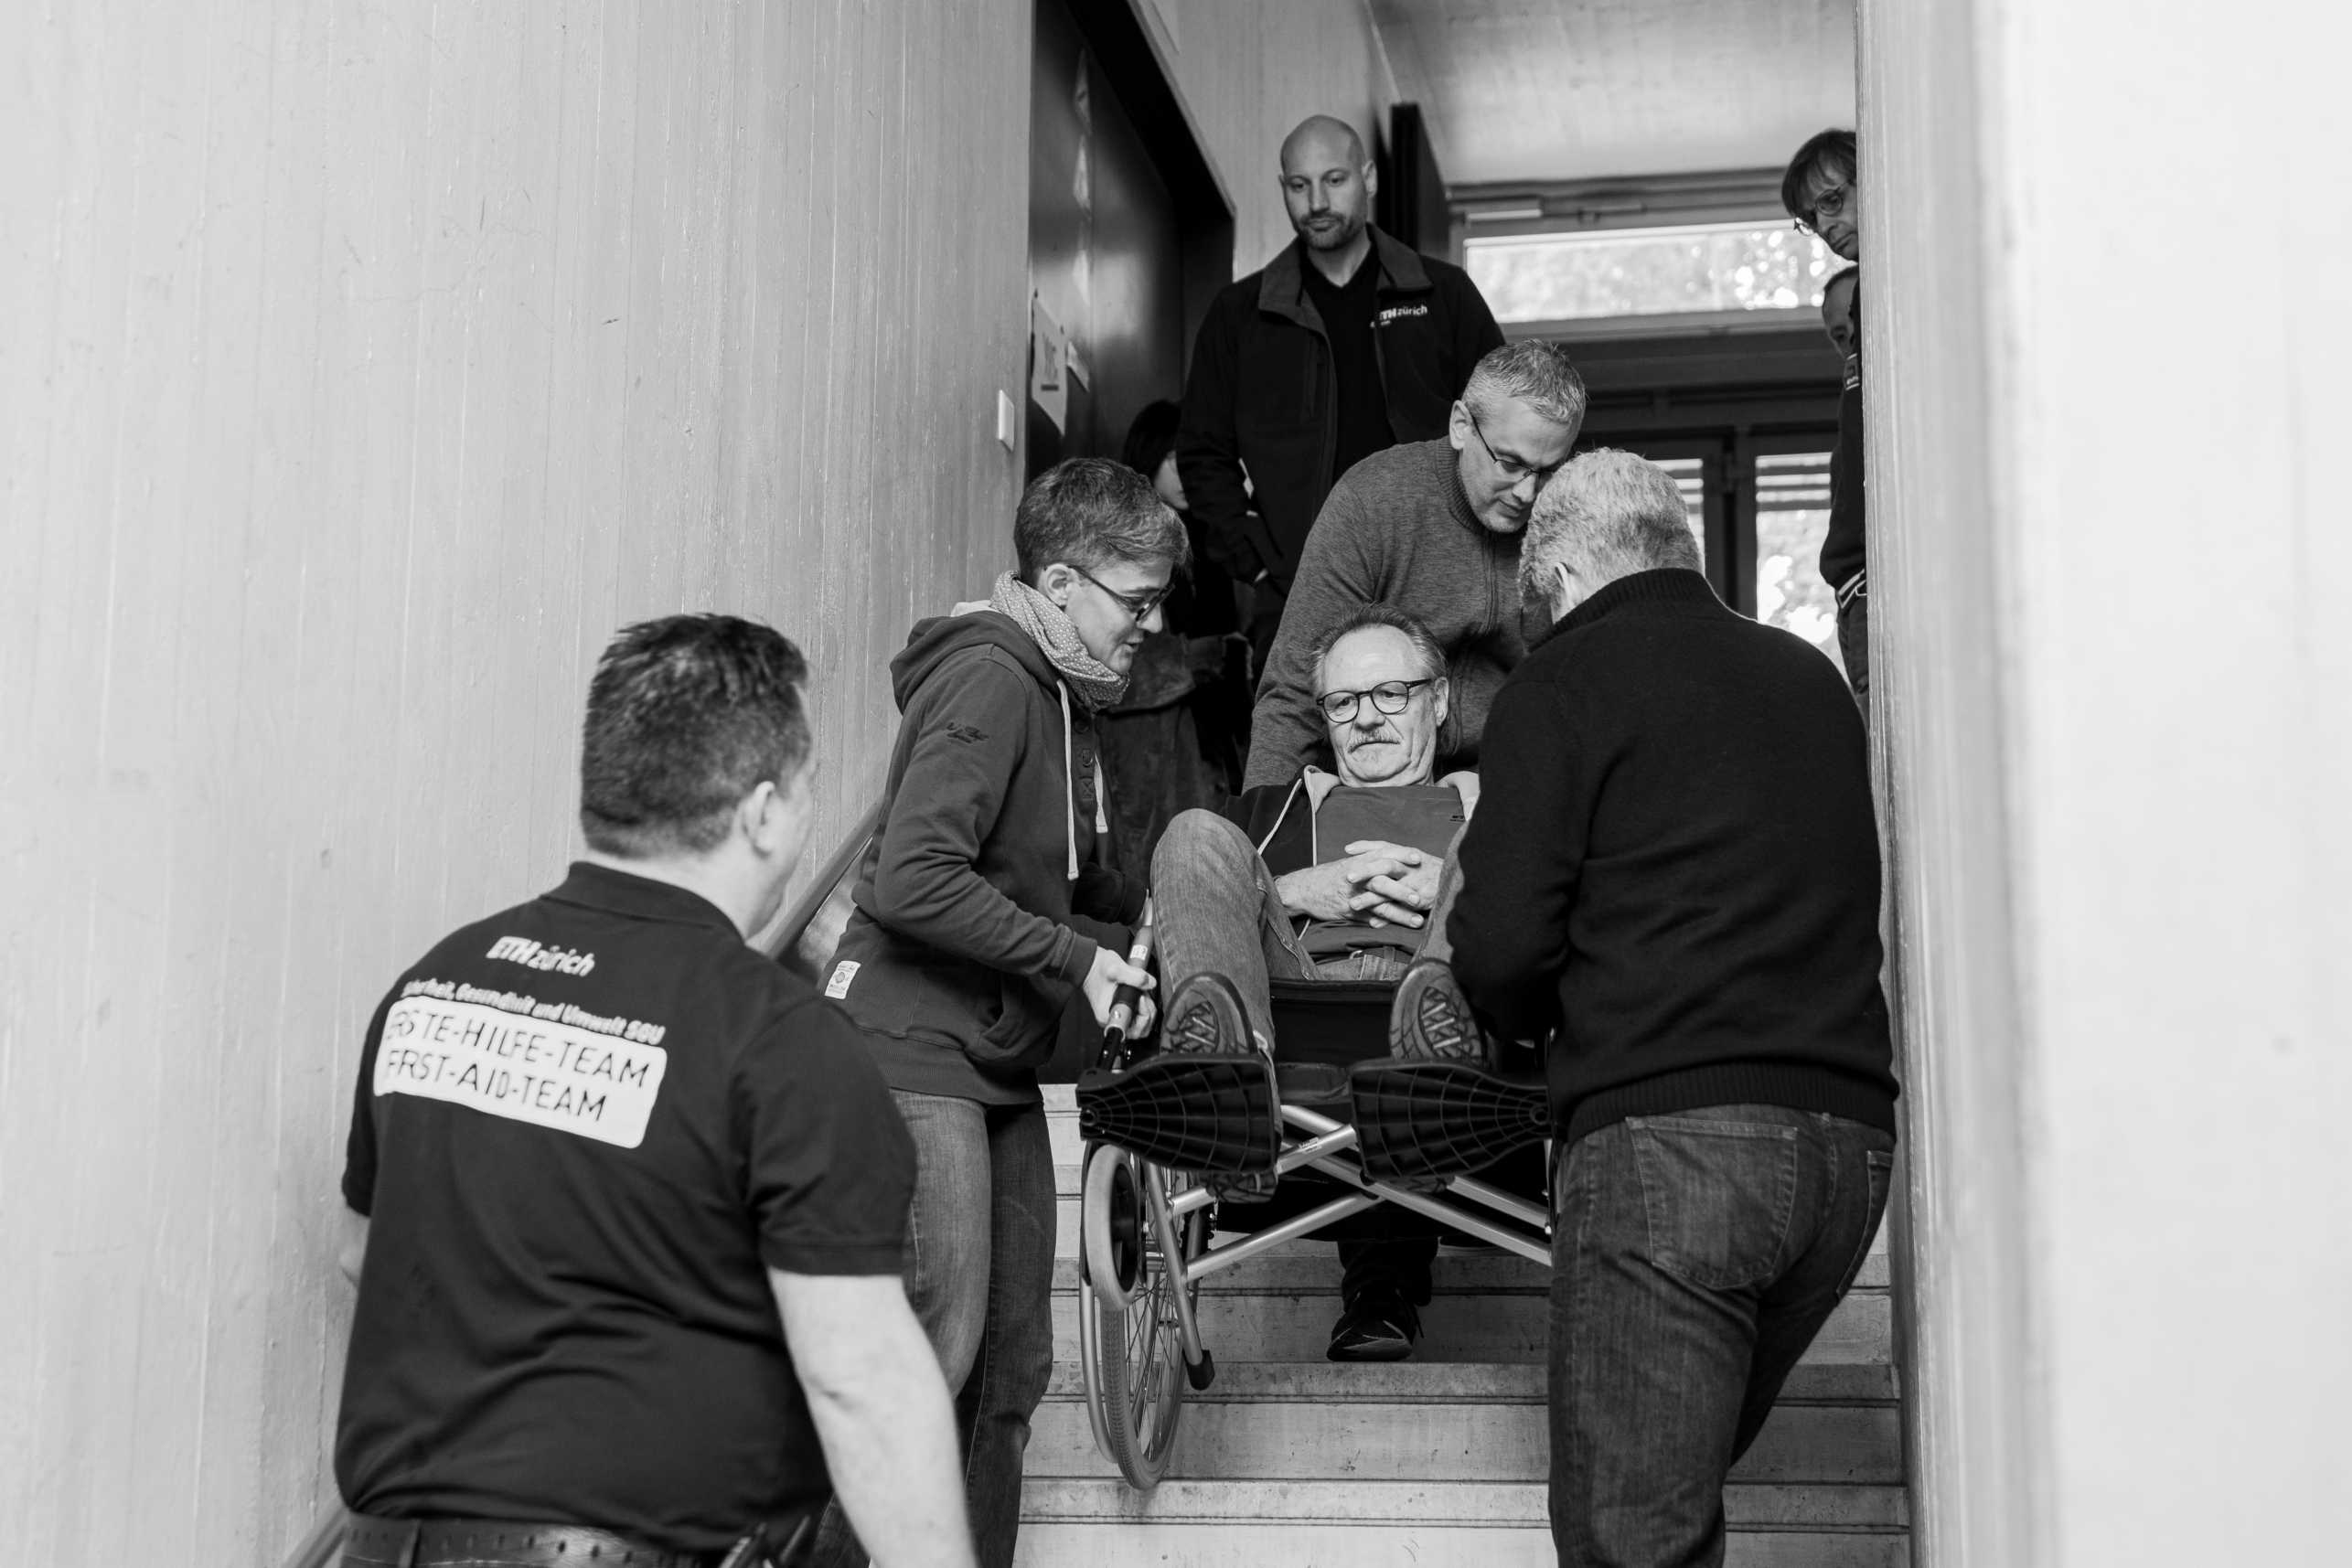 A group of people evacuate a man in a wheelchair via the stairwell.